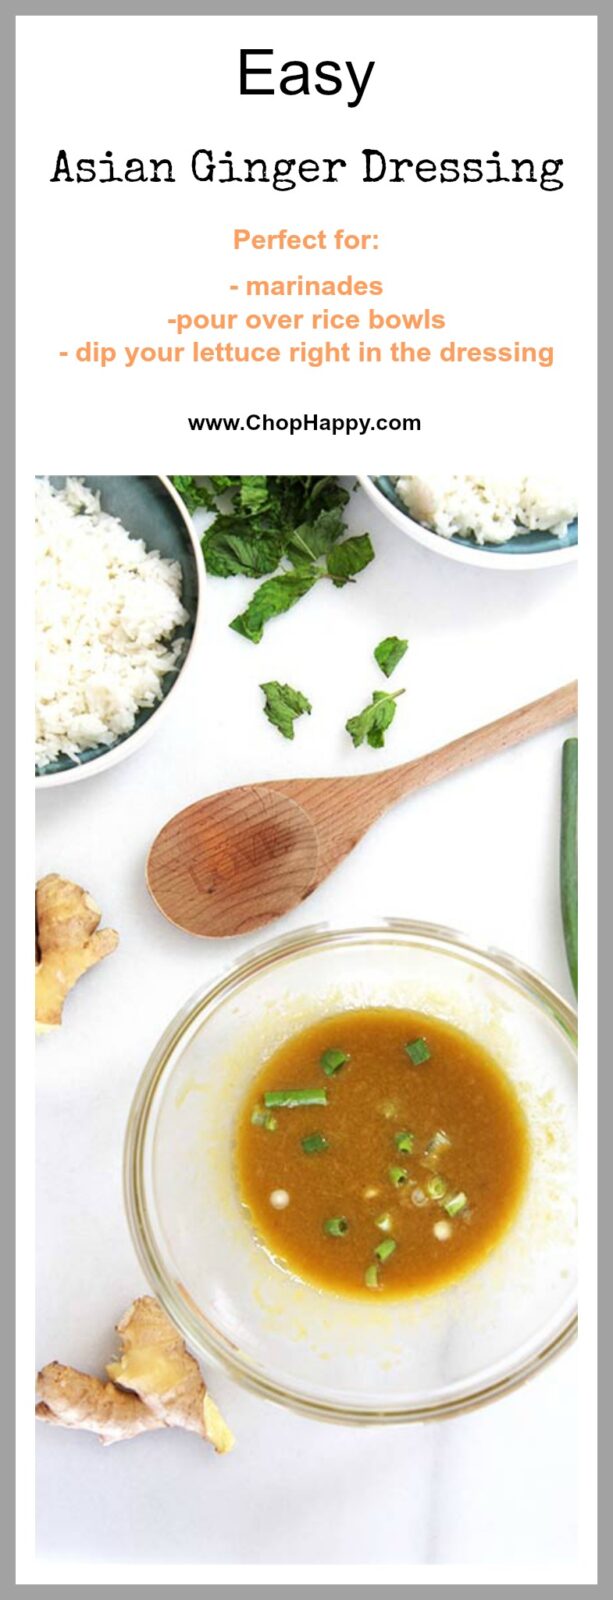 Simple Tangy Ginger Dressing Recipe-Get ready for a fun and quick Asian dressing that is so versatile! You can use it as a salad dressing, marinade for chicken, or on a rice bowl. Best part it takes less then 10 minutes to make. www.ChopHappy.com